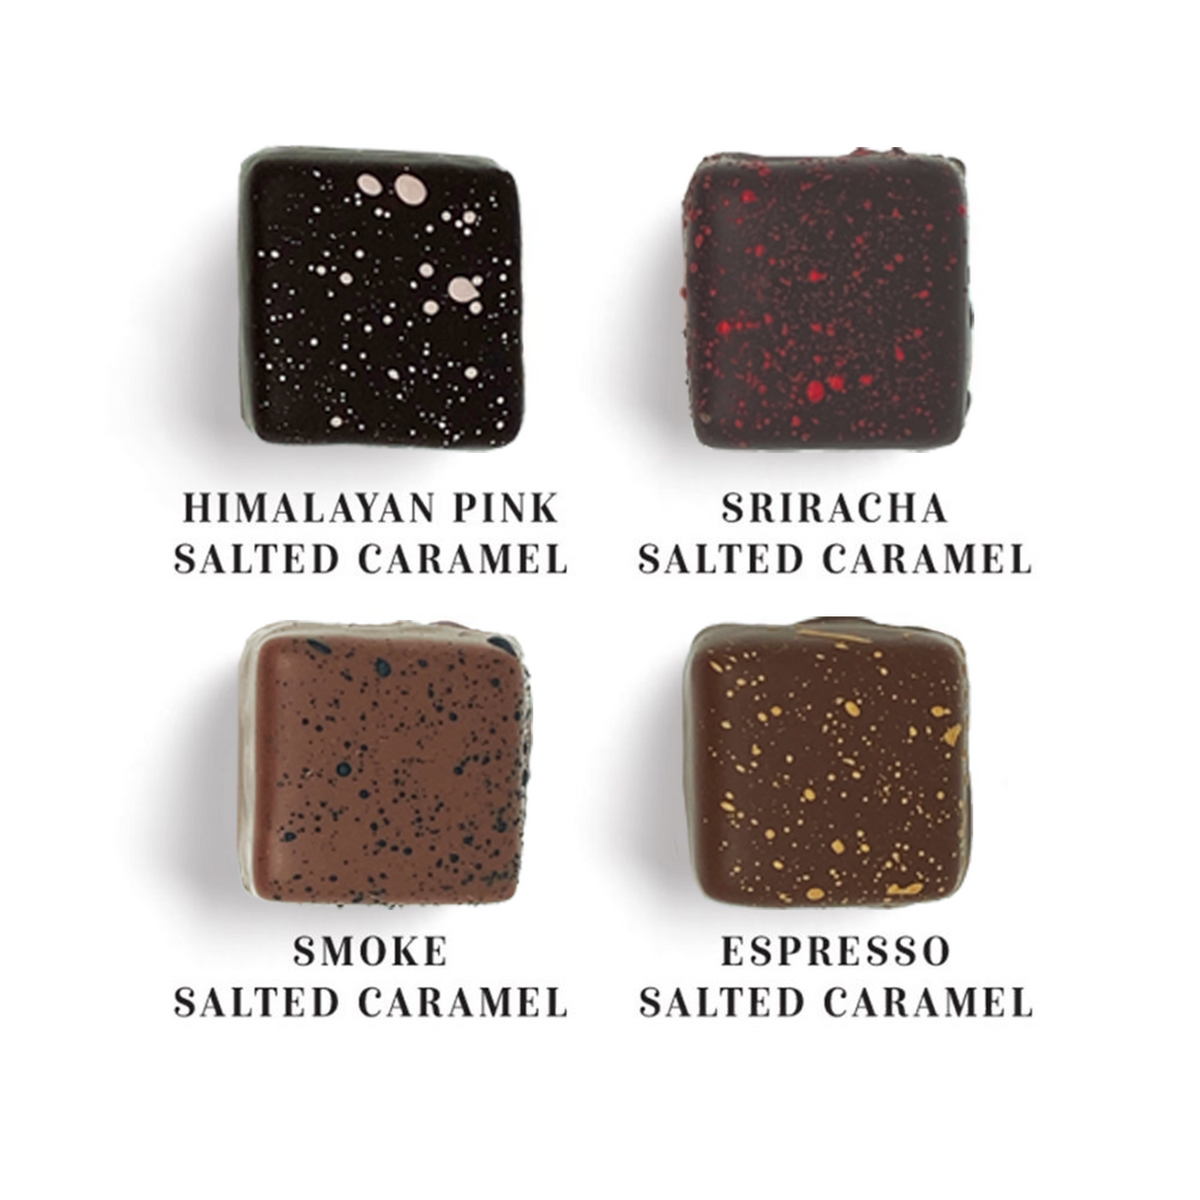 Himalayan Pink Salt, Sriracha, Smoke, and Espresso Salted Caramels inside Dilettante&#39;s Salted Caramel Collection